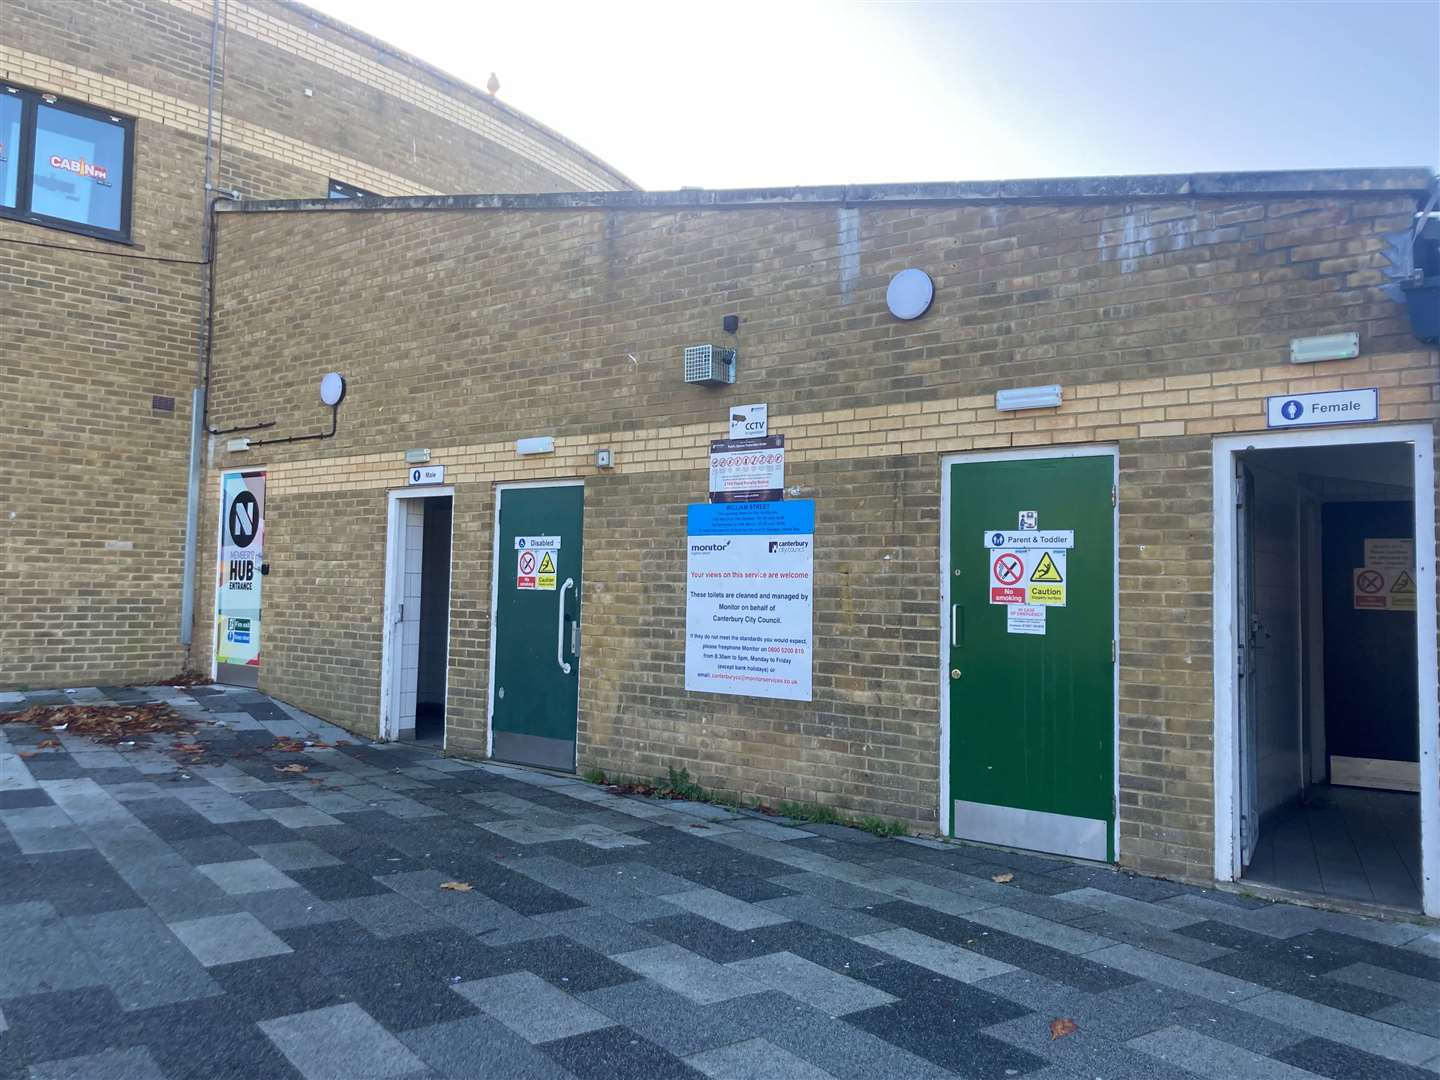 William Street toilets in Herne Bay have been targeted by vandals